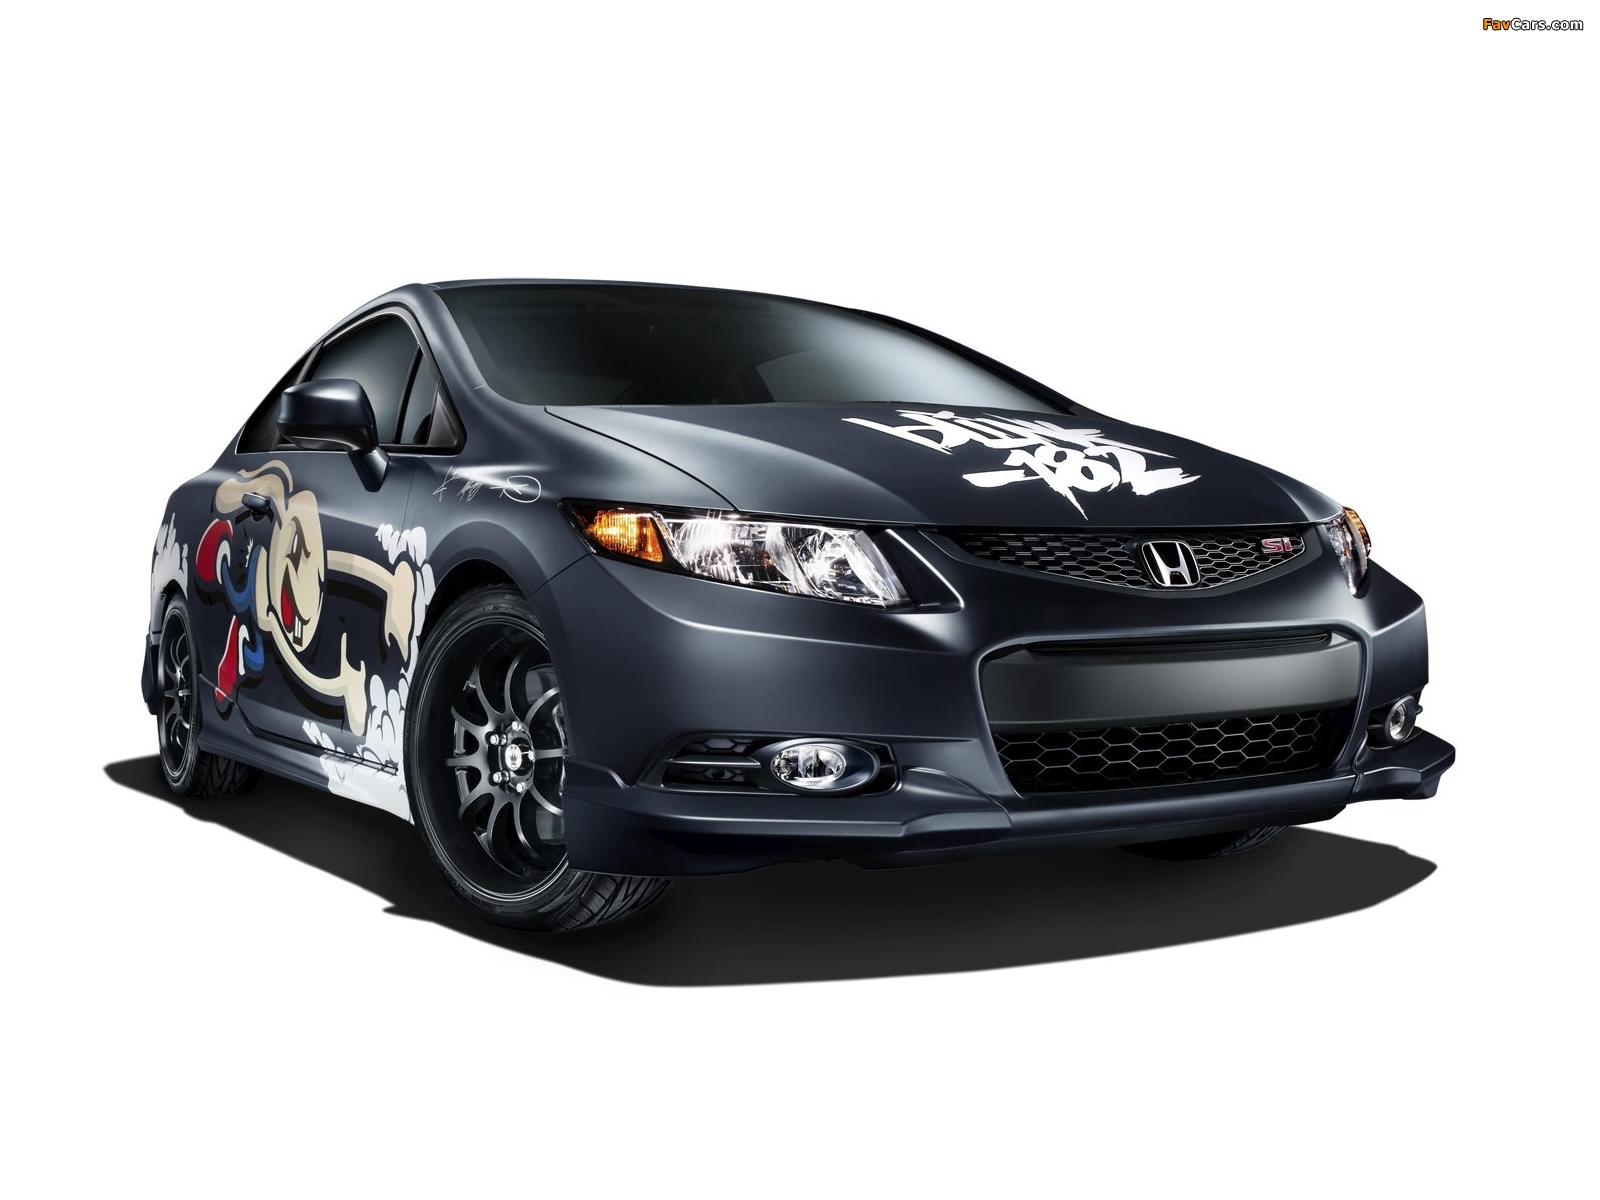 Honda Civic Si Coupe by Blink-182 2011 pictures (1600 x 1200)